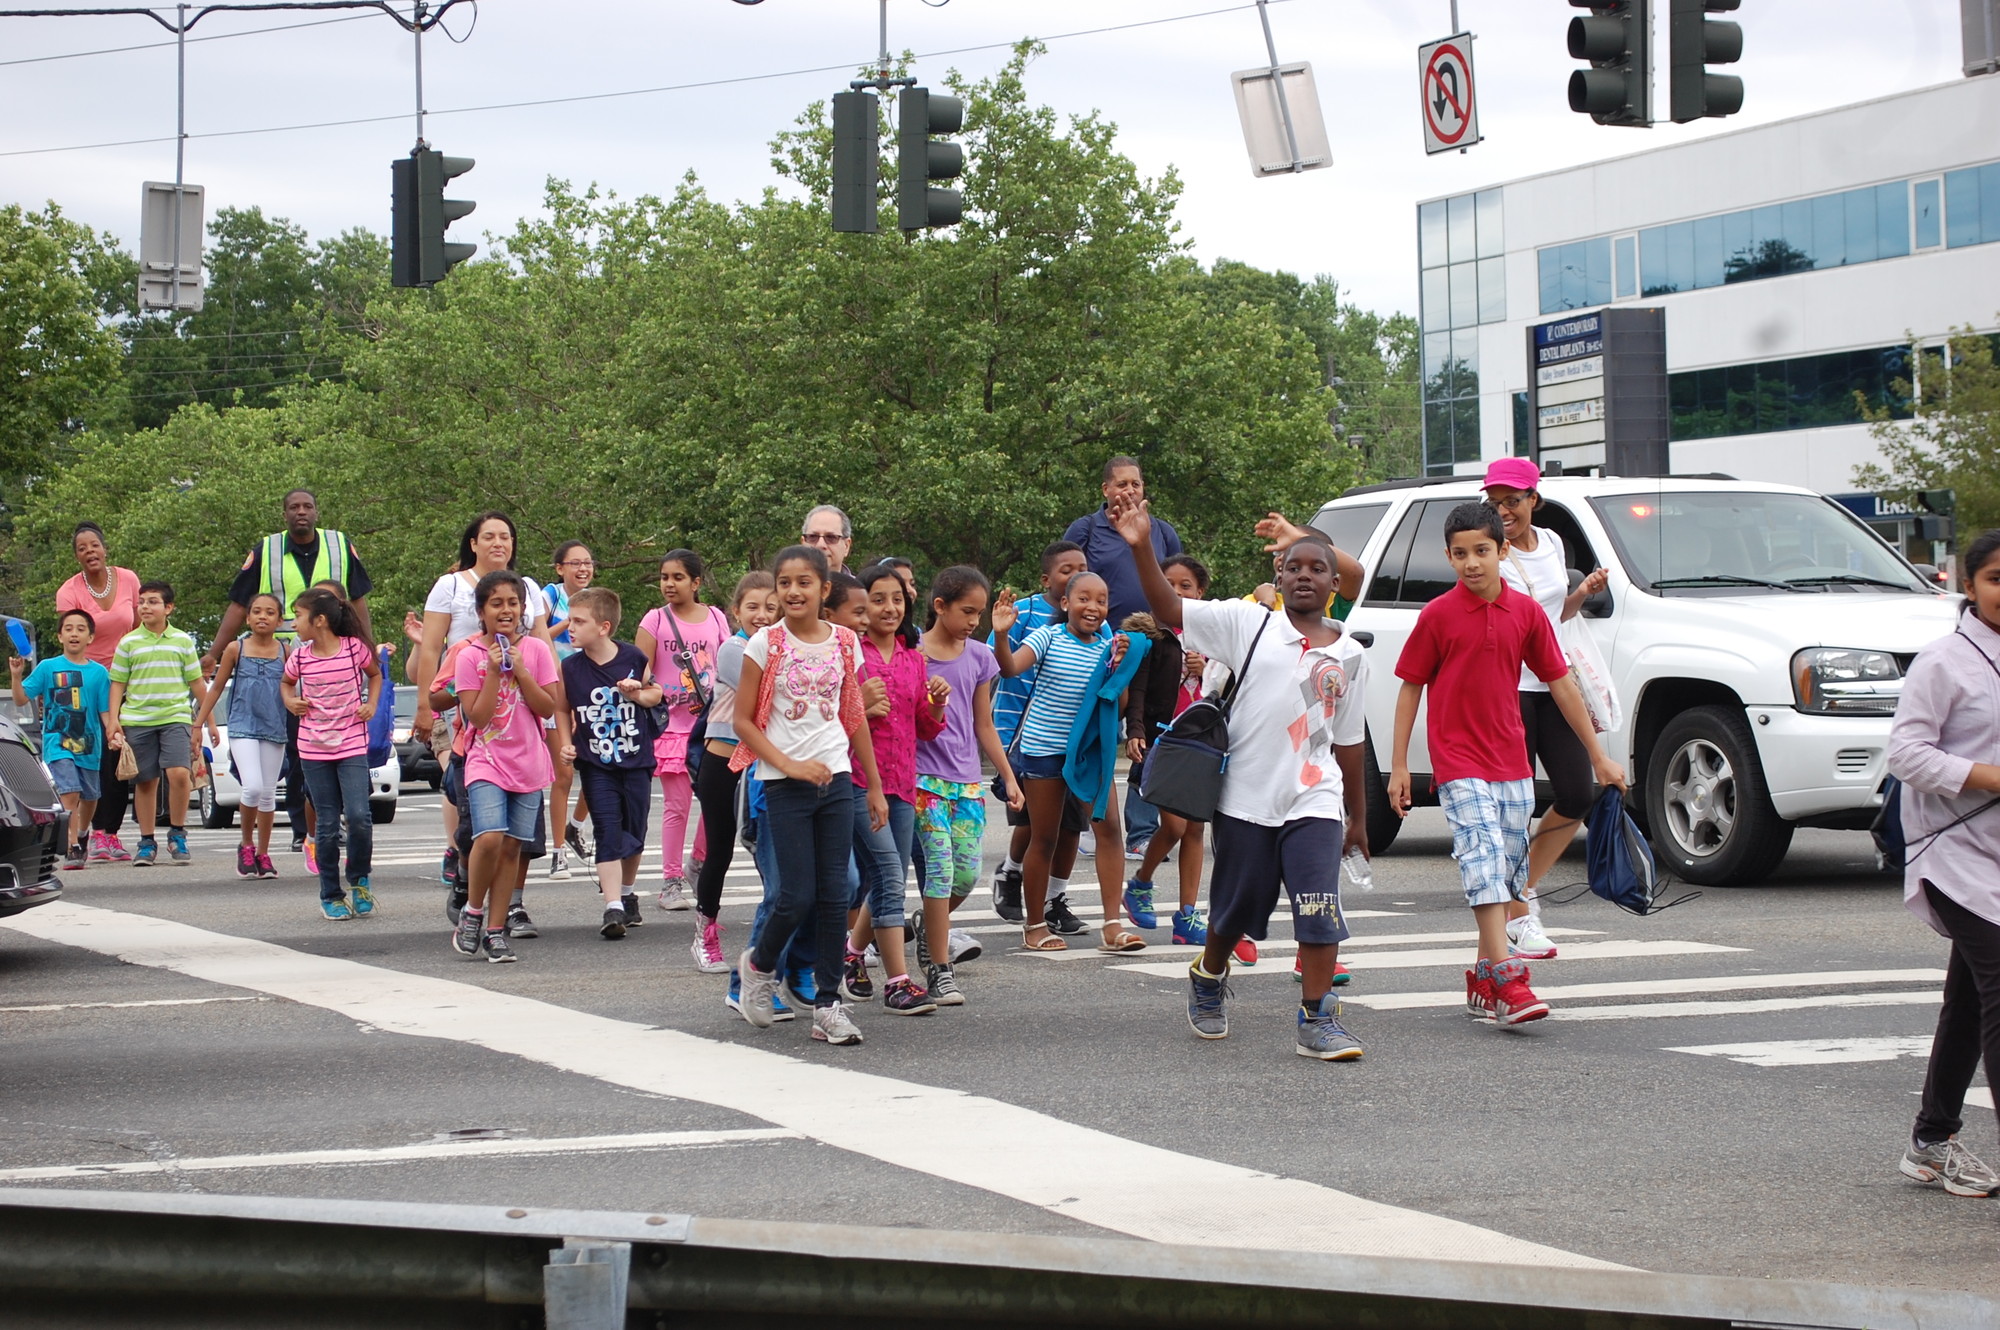 A group of students from Forest Road School crossed Sunrise during the tour, on their way to the Waldinger Library.